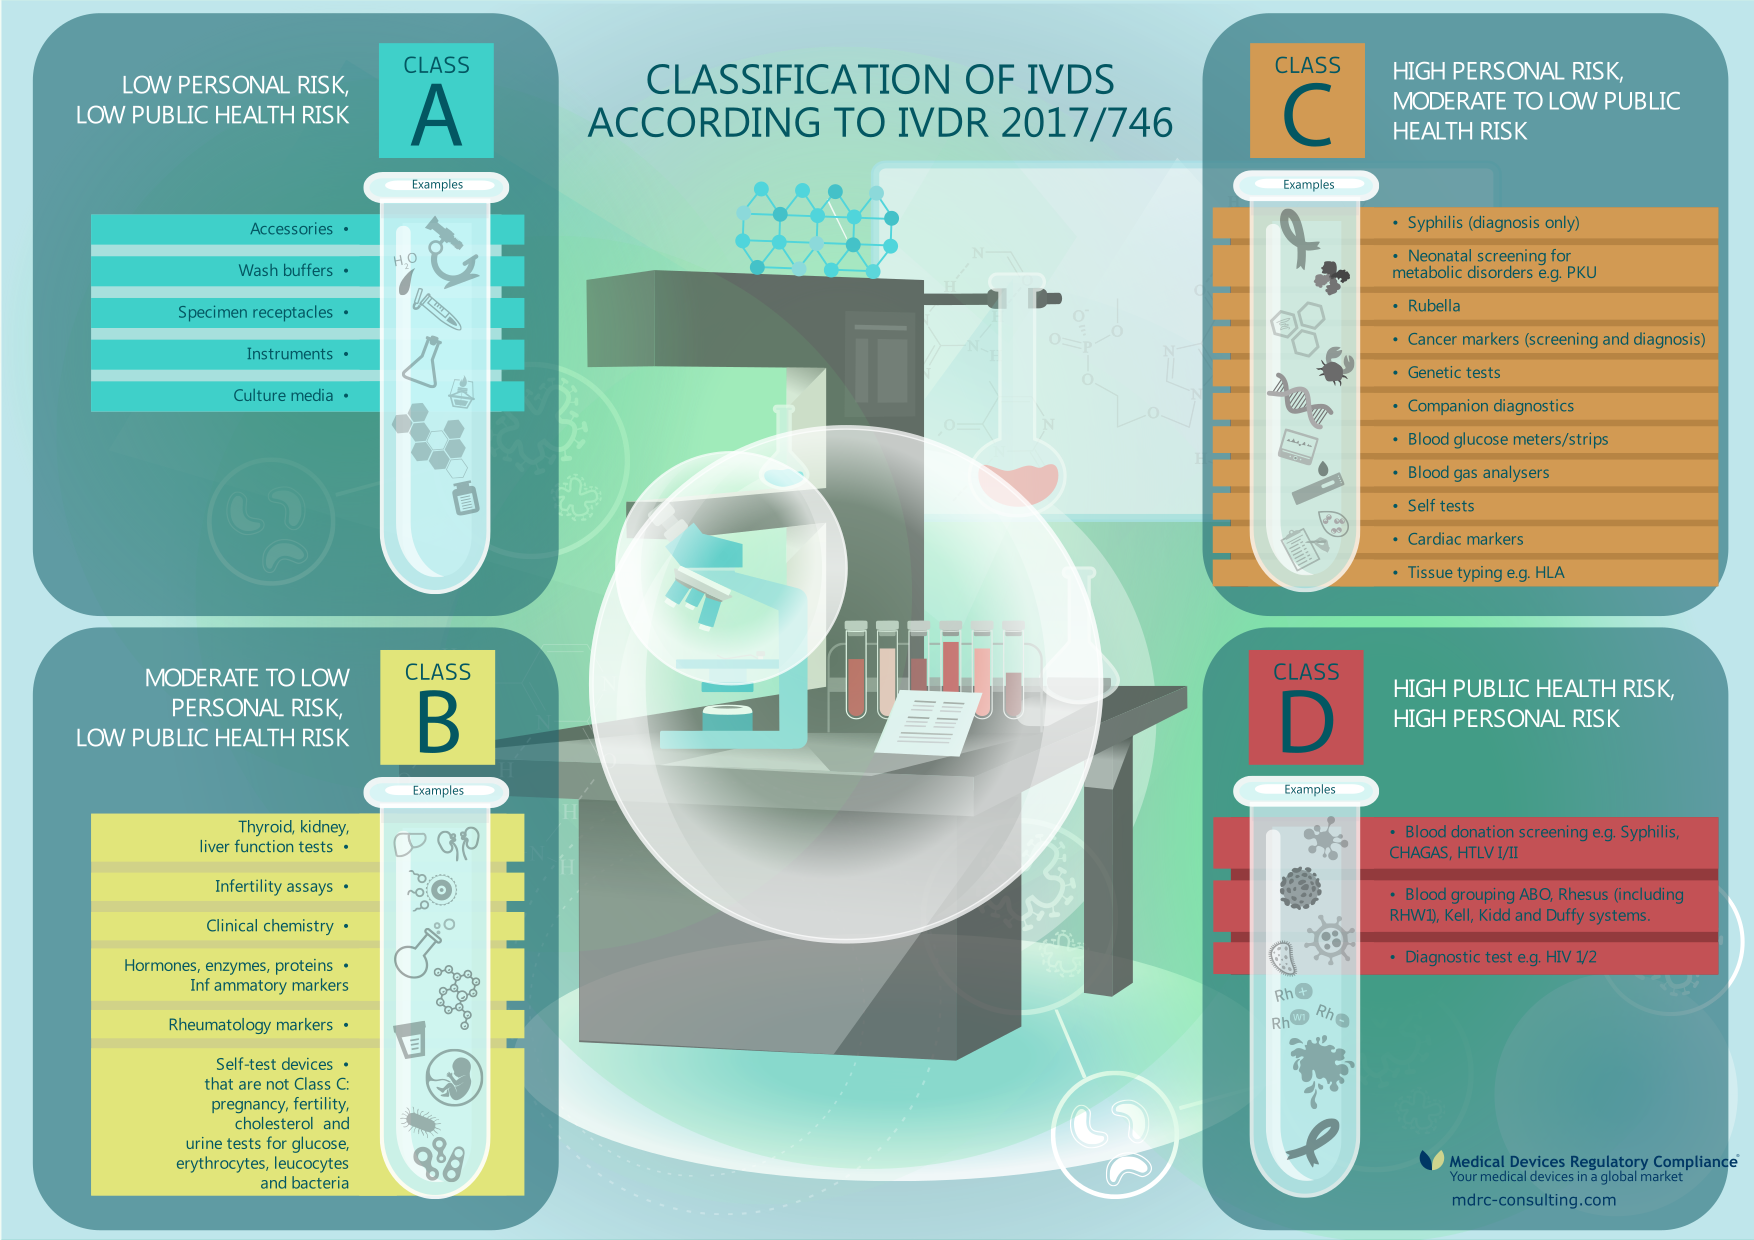 Classification of in vitro diagnostic medical devices in Europe - infographic